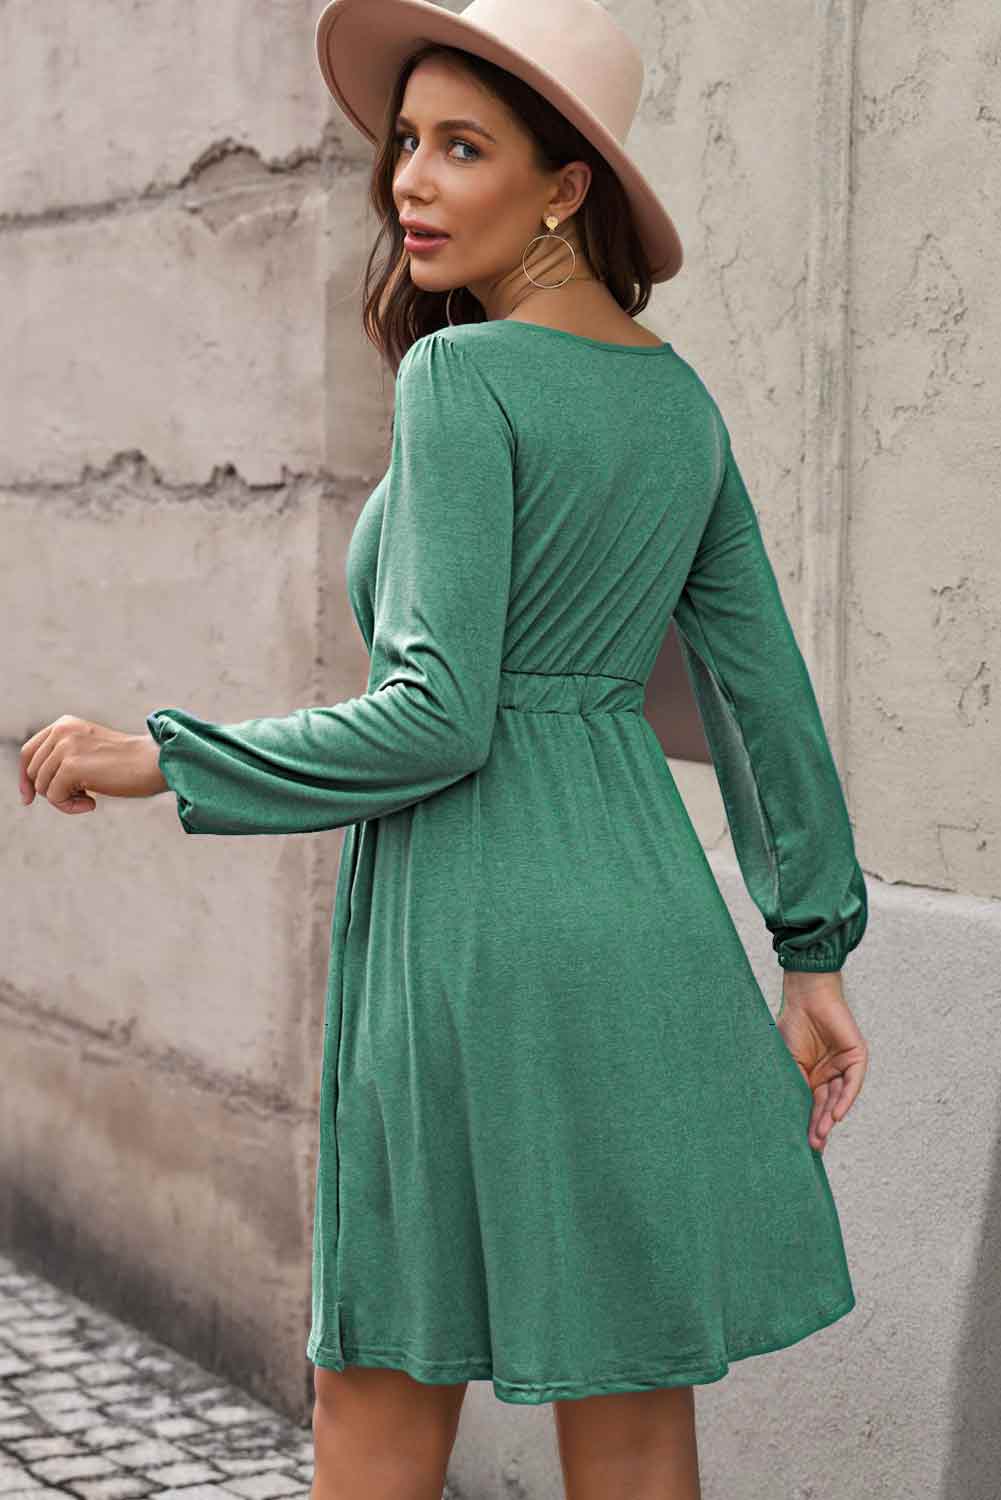 Fall In To Me Scoop Neck Empire Waist Long Sleeve Dress